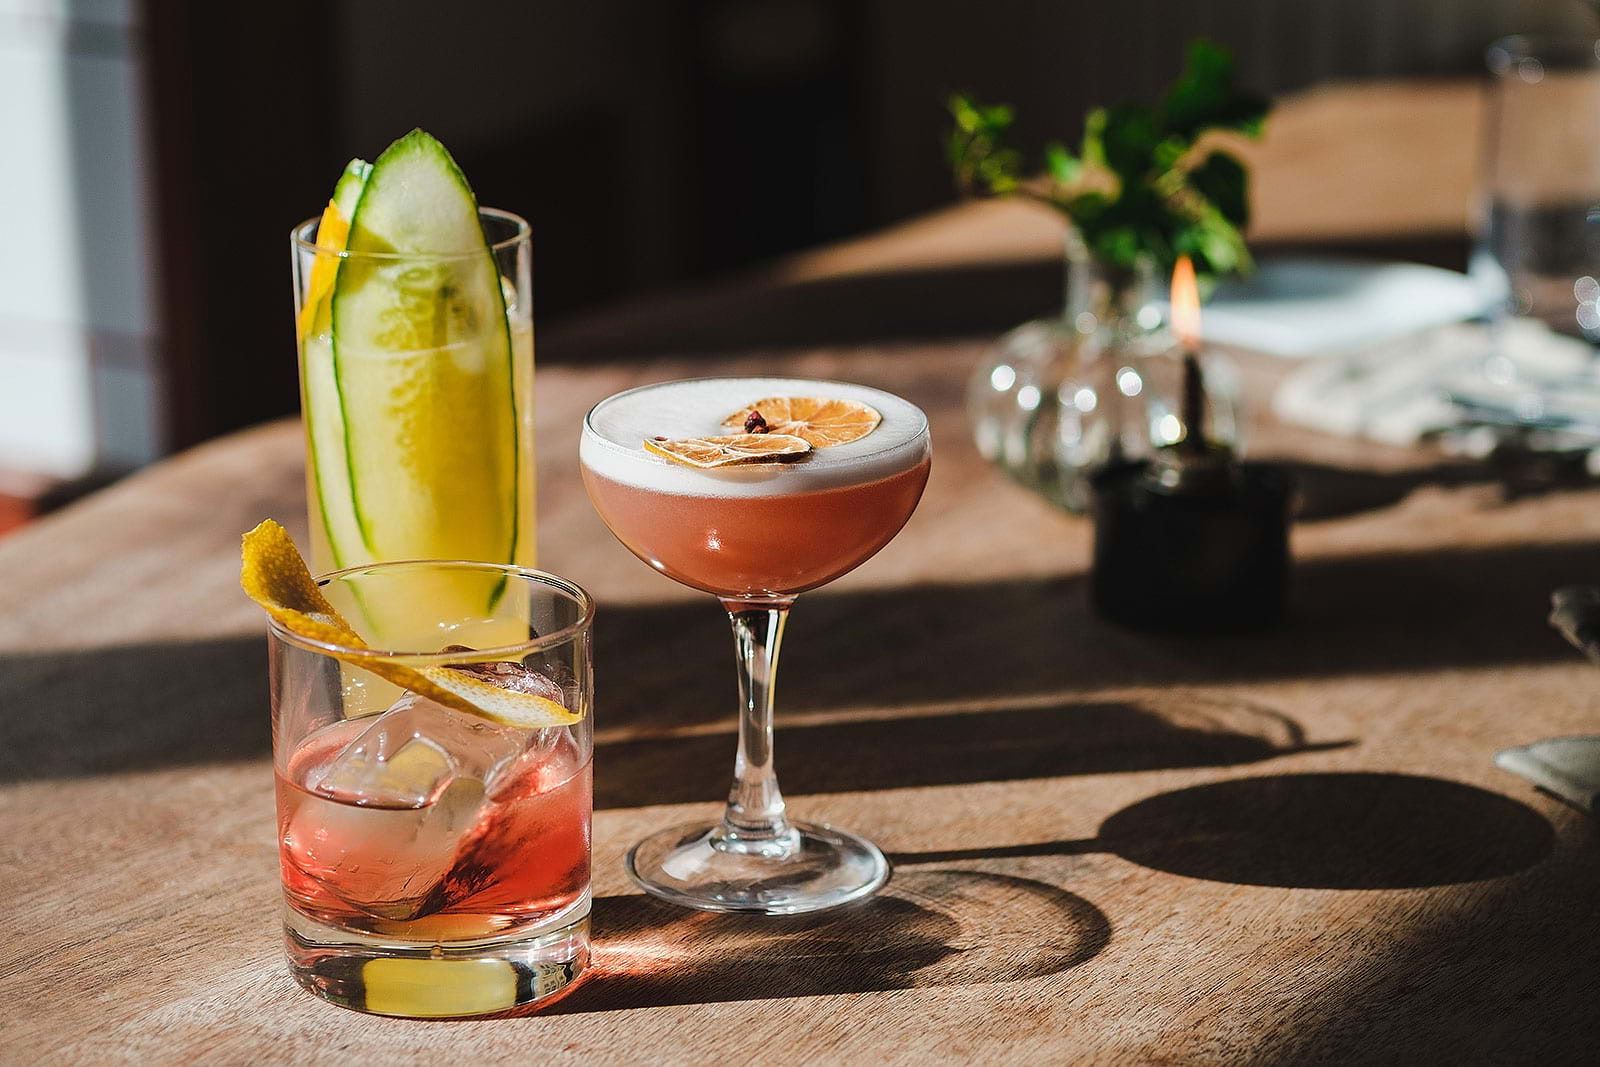 Guide to the best bars in Mayfair